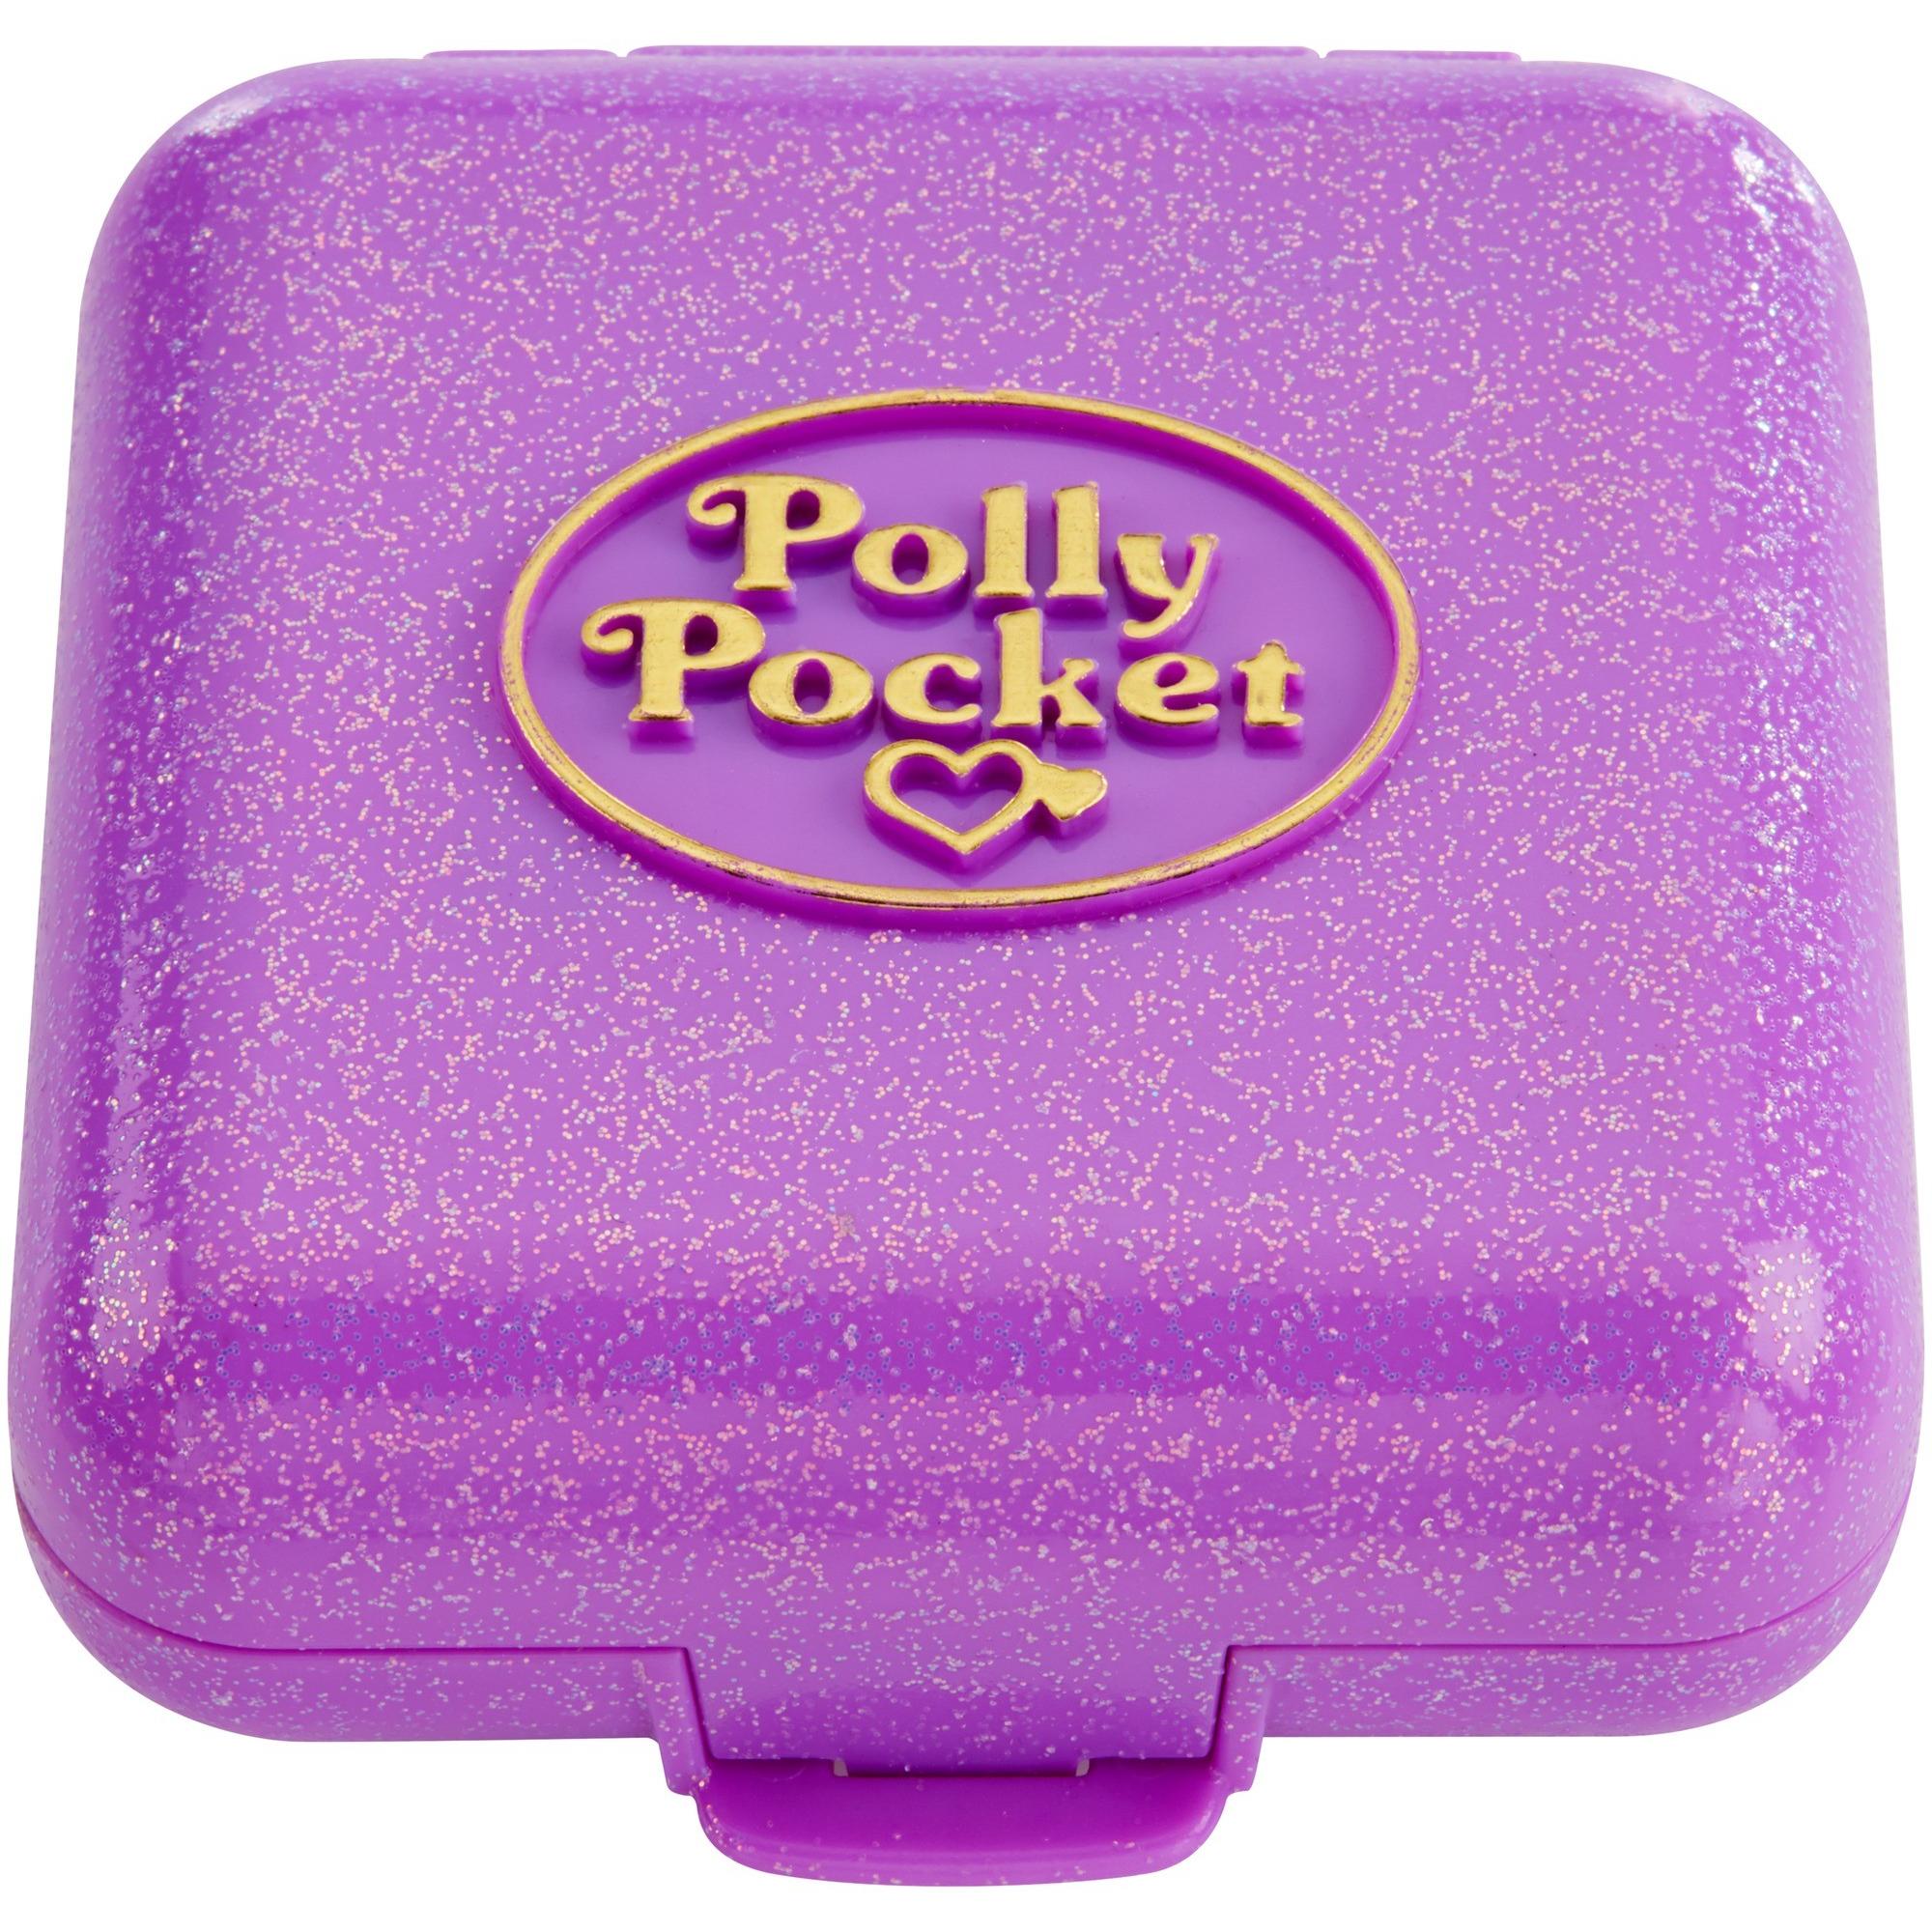 Polly Pocket Partytime Surprise Keepsake 30th Anniversary Compact - image 2 of 6